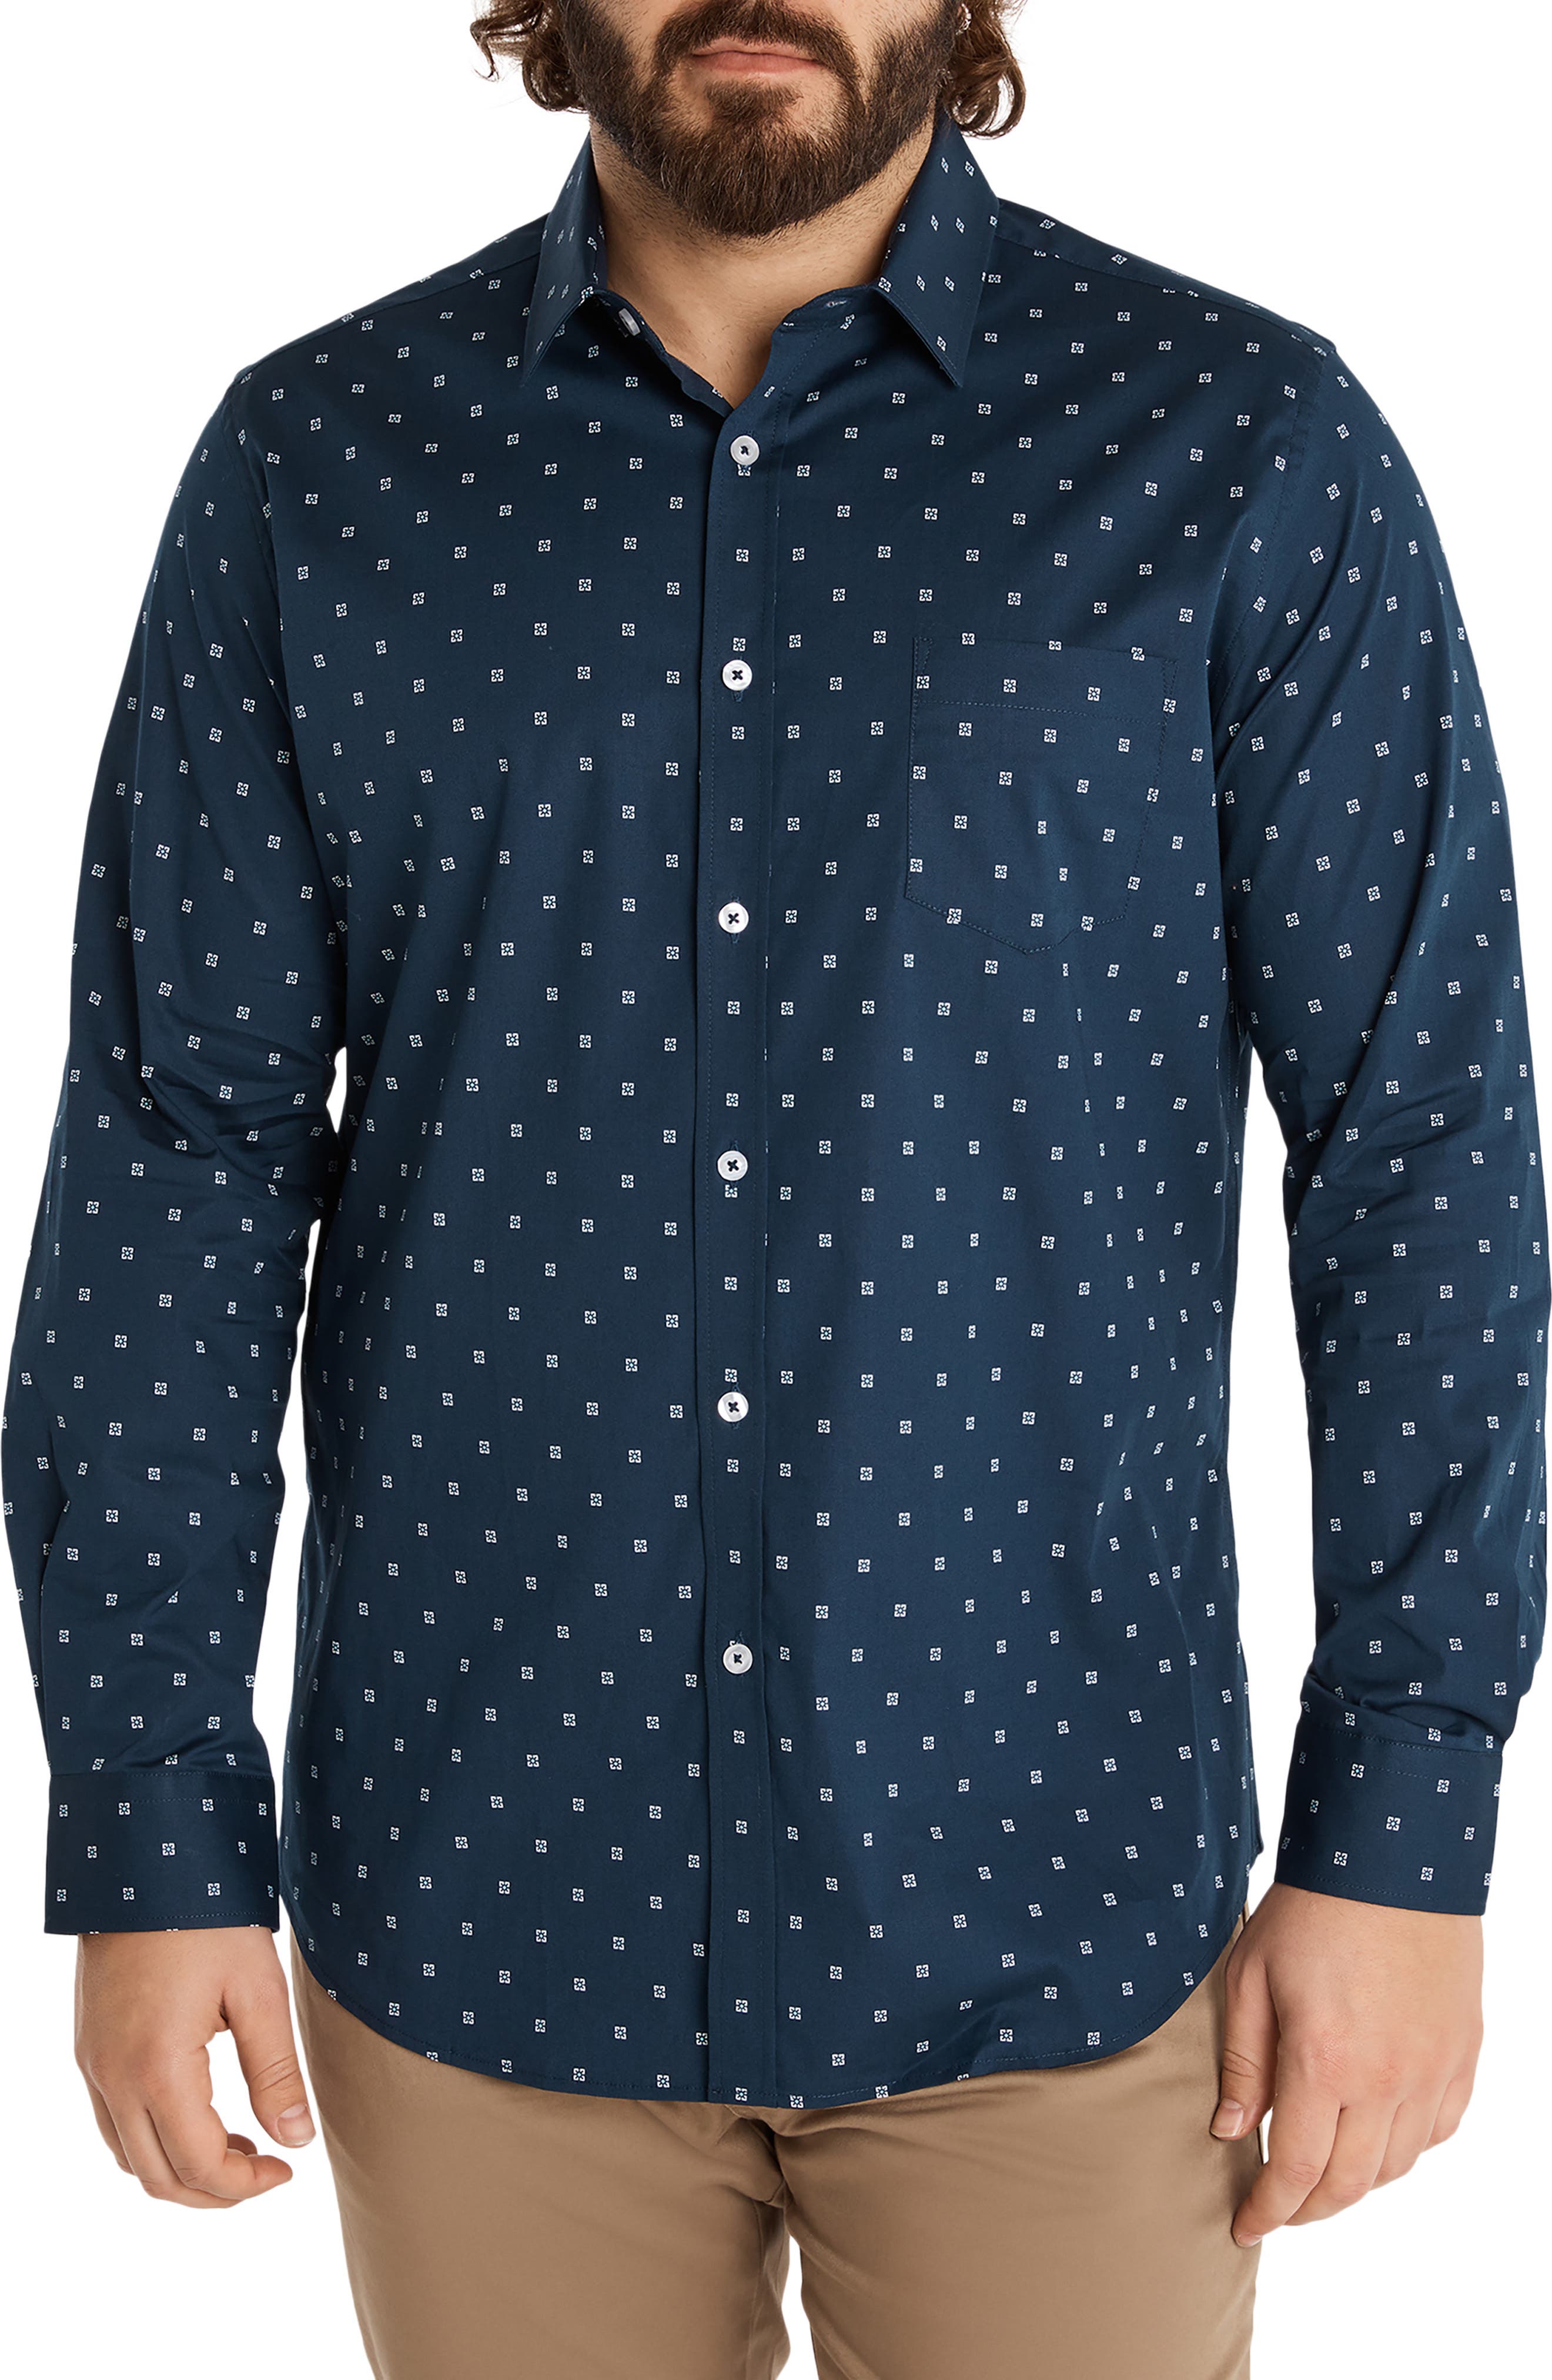 Johnny Bigg Jack Floral Stretch Cotton Button-Up Shirt in Navy